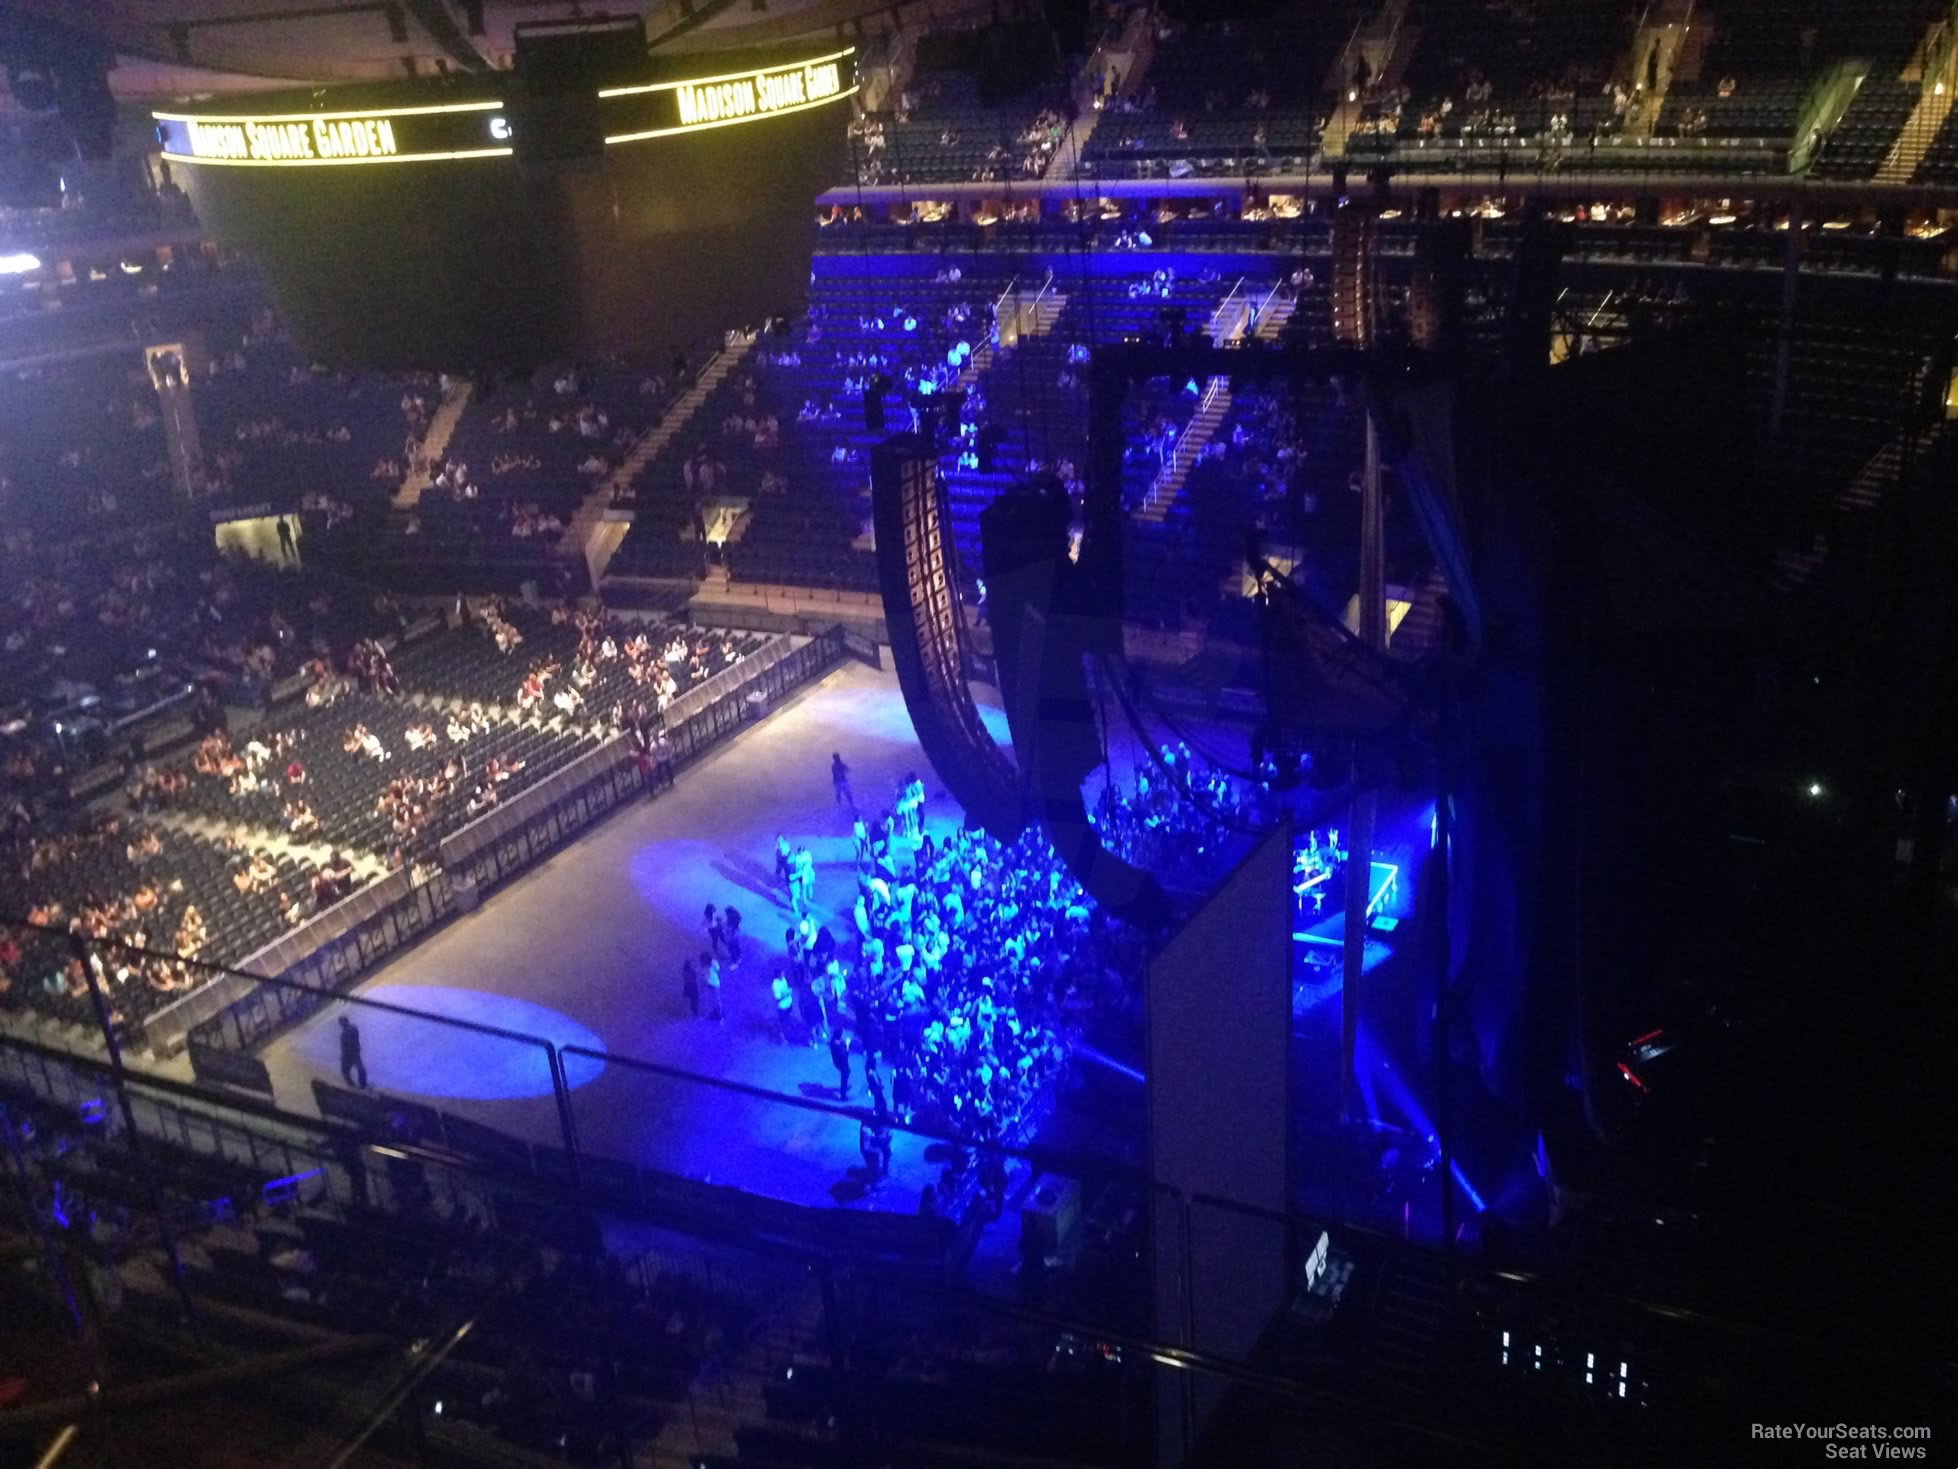 section 316 seat view  for concert - madison square garden